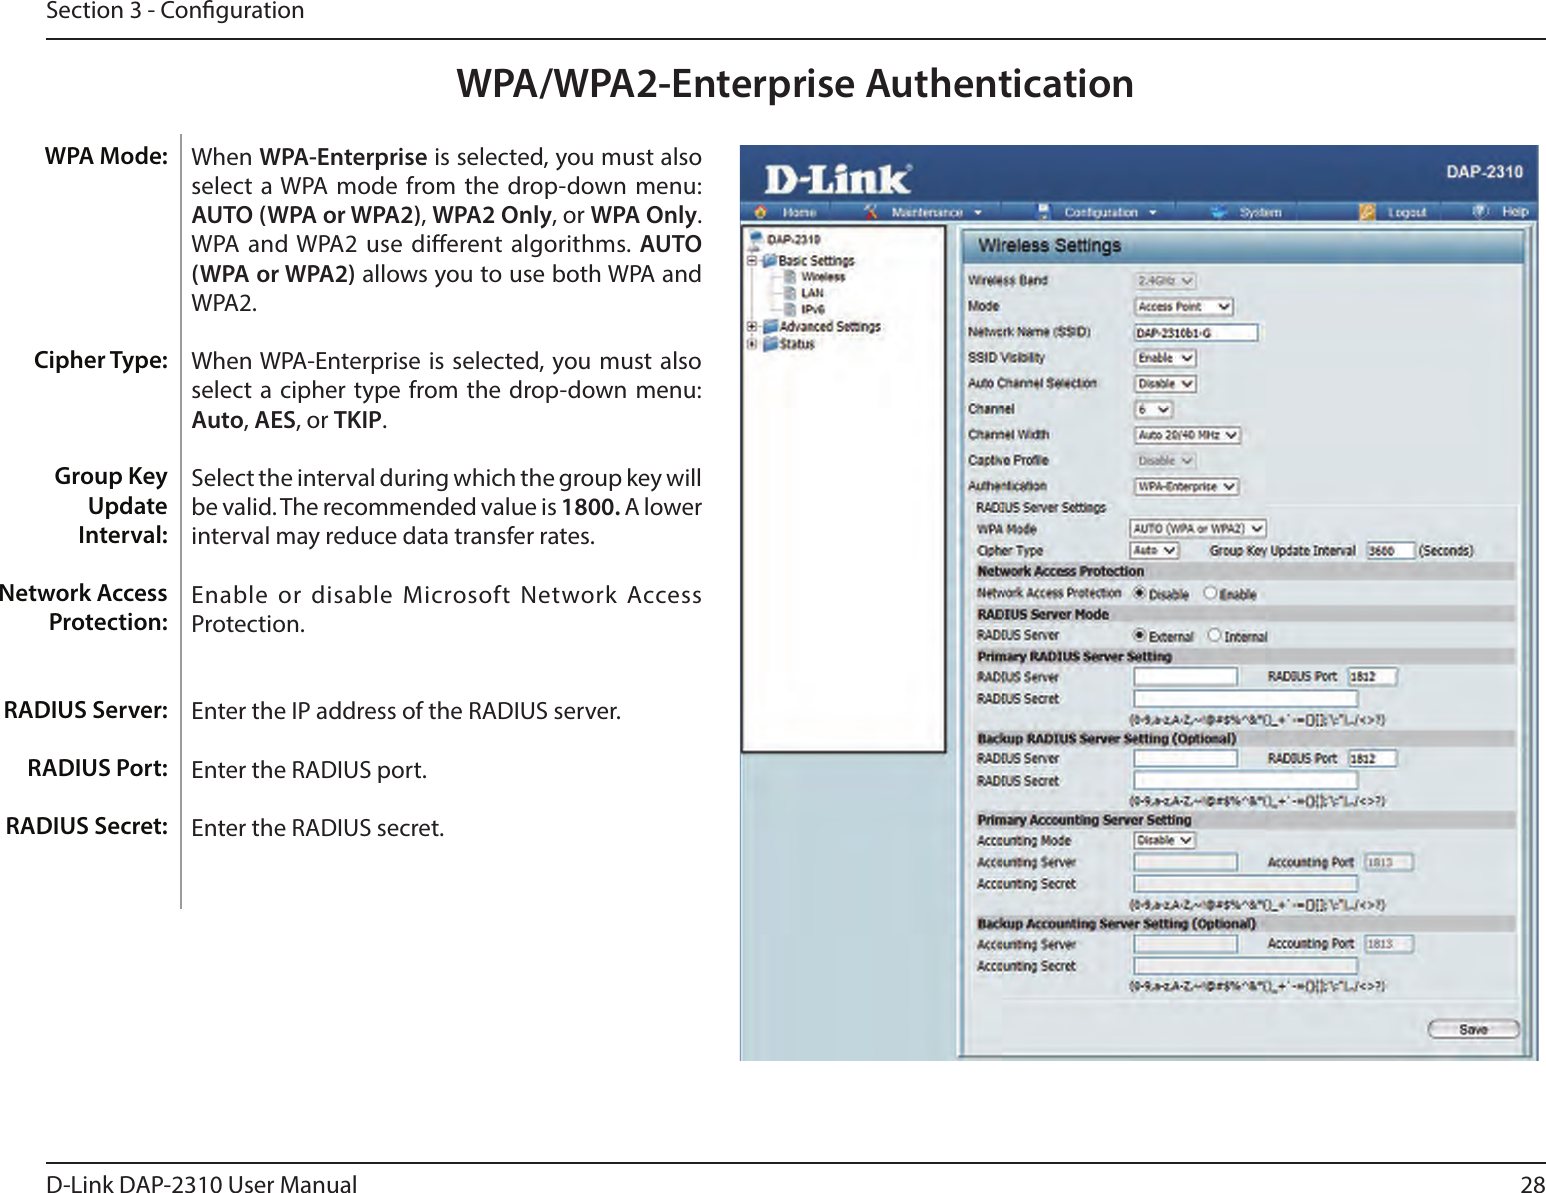 28D-Link DAP-2310 User ManualSection 3 - CongurationWPA/WPA2-Enterprise AuthenticationWhen WPA-Enterprise is selected, you must also select  a WPA mode from the drop-down menu: AUTO (WPA or WPA2), WPA2 Only, or WPA Only. WPA and WPA2 use dierent algorithms. AUTO (WPA or WPA2) allows you to use both WPA and WPA2. When WPA-Enterprise is  selected, you must also select  a cipher type from the  drop-down menu: Auto, AES, or TKIP.Select the interval during which the group key will be valid. The recommended value is 1800. A lower interval may reduce data transfer rates.Enable or disable Microsoft  Network Access Protection.Enter the IP address of the RADIUS server.Enter the RADIUS port.Enter the RADIUS secret.WPA Mode: Cipher Type:Group Key Update Interval:Network Access Protection:RADIUS Server:RADIUS Port:RADIUS Secret: